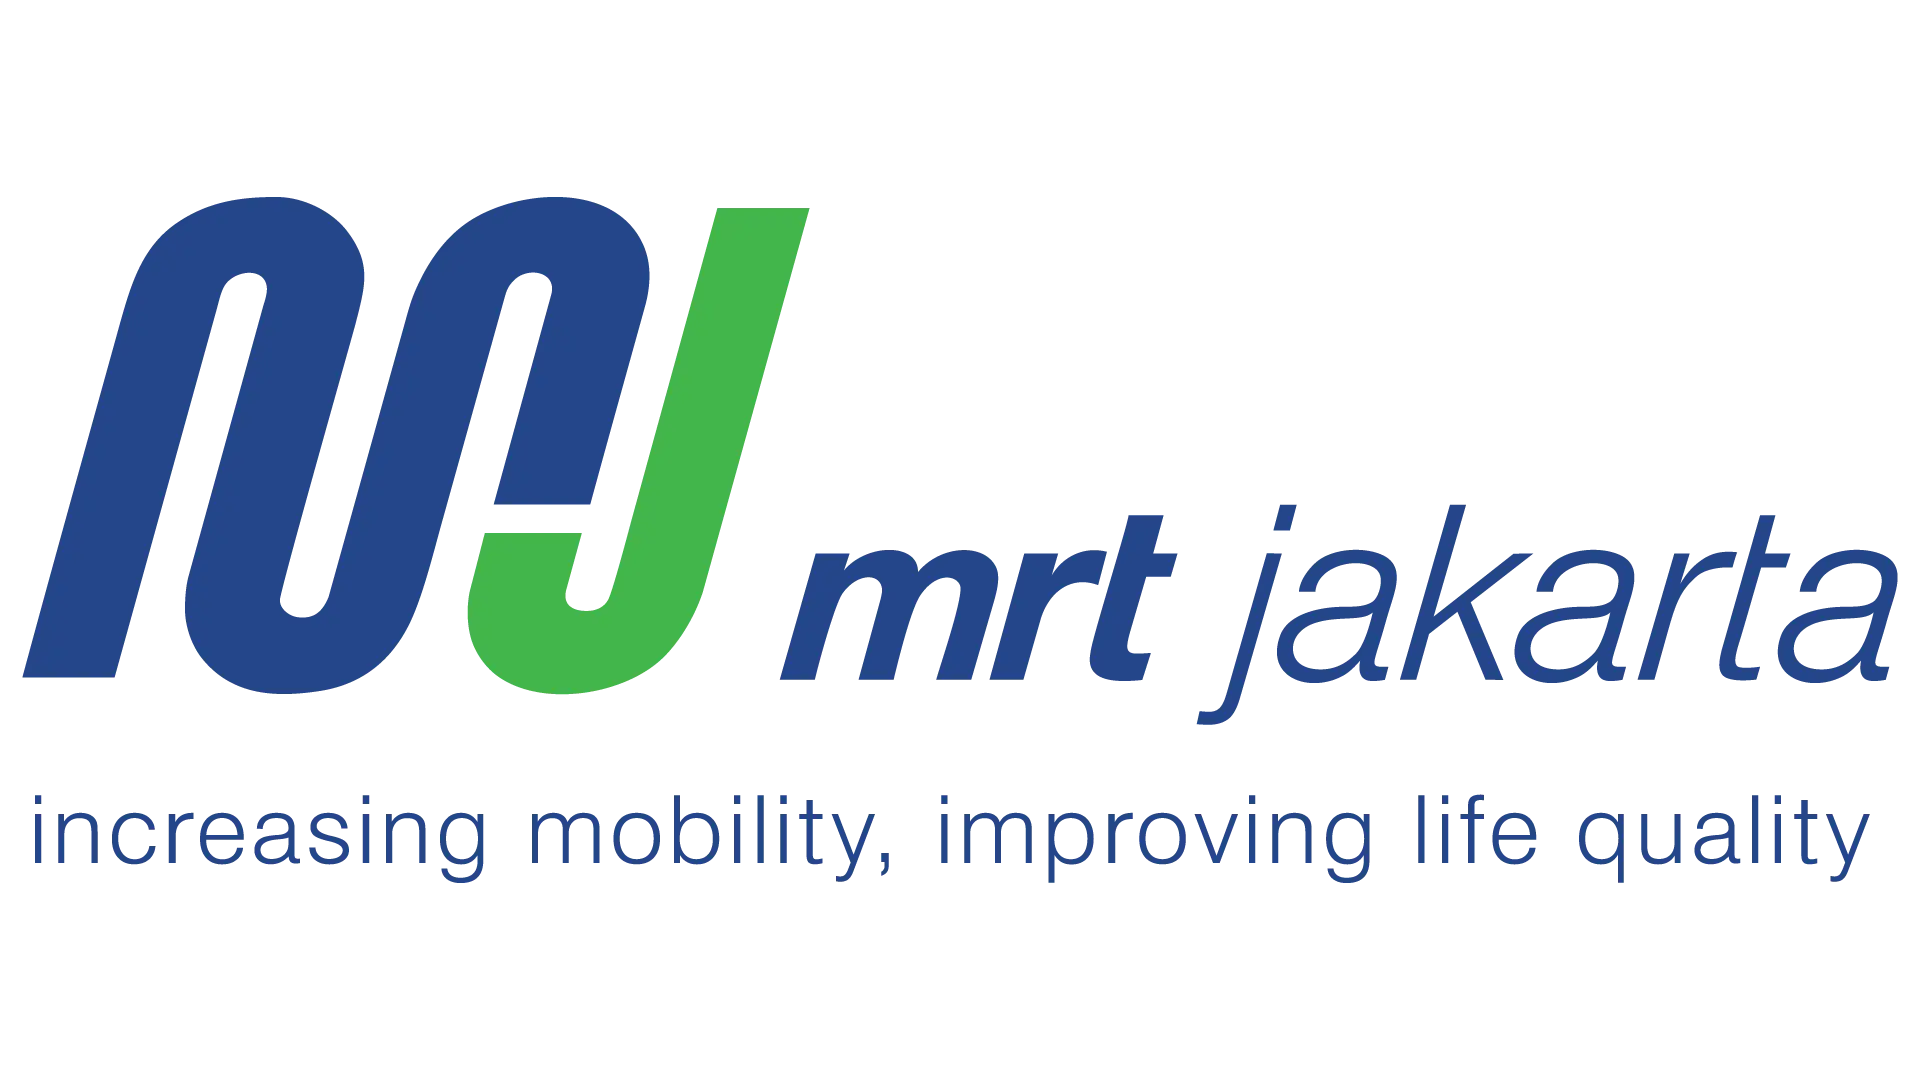 WhatsApp for transportation industry owned by MRT Jakarta company